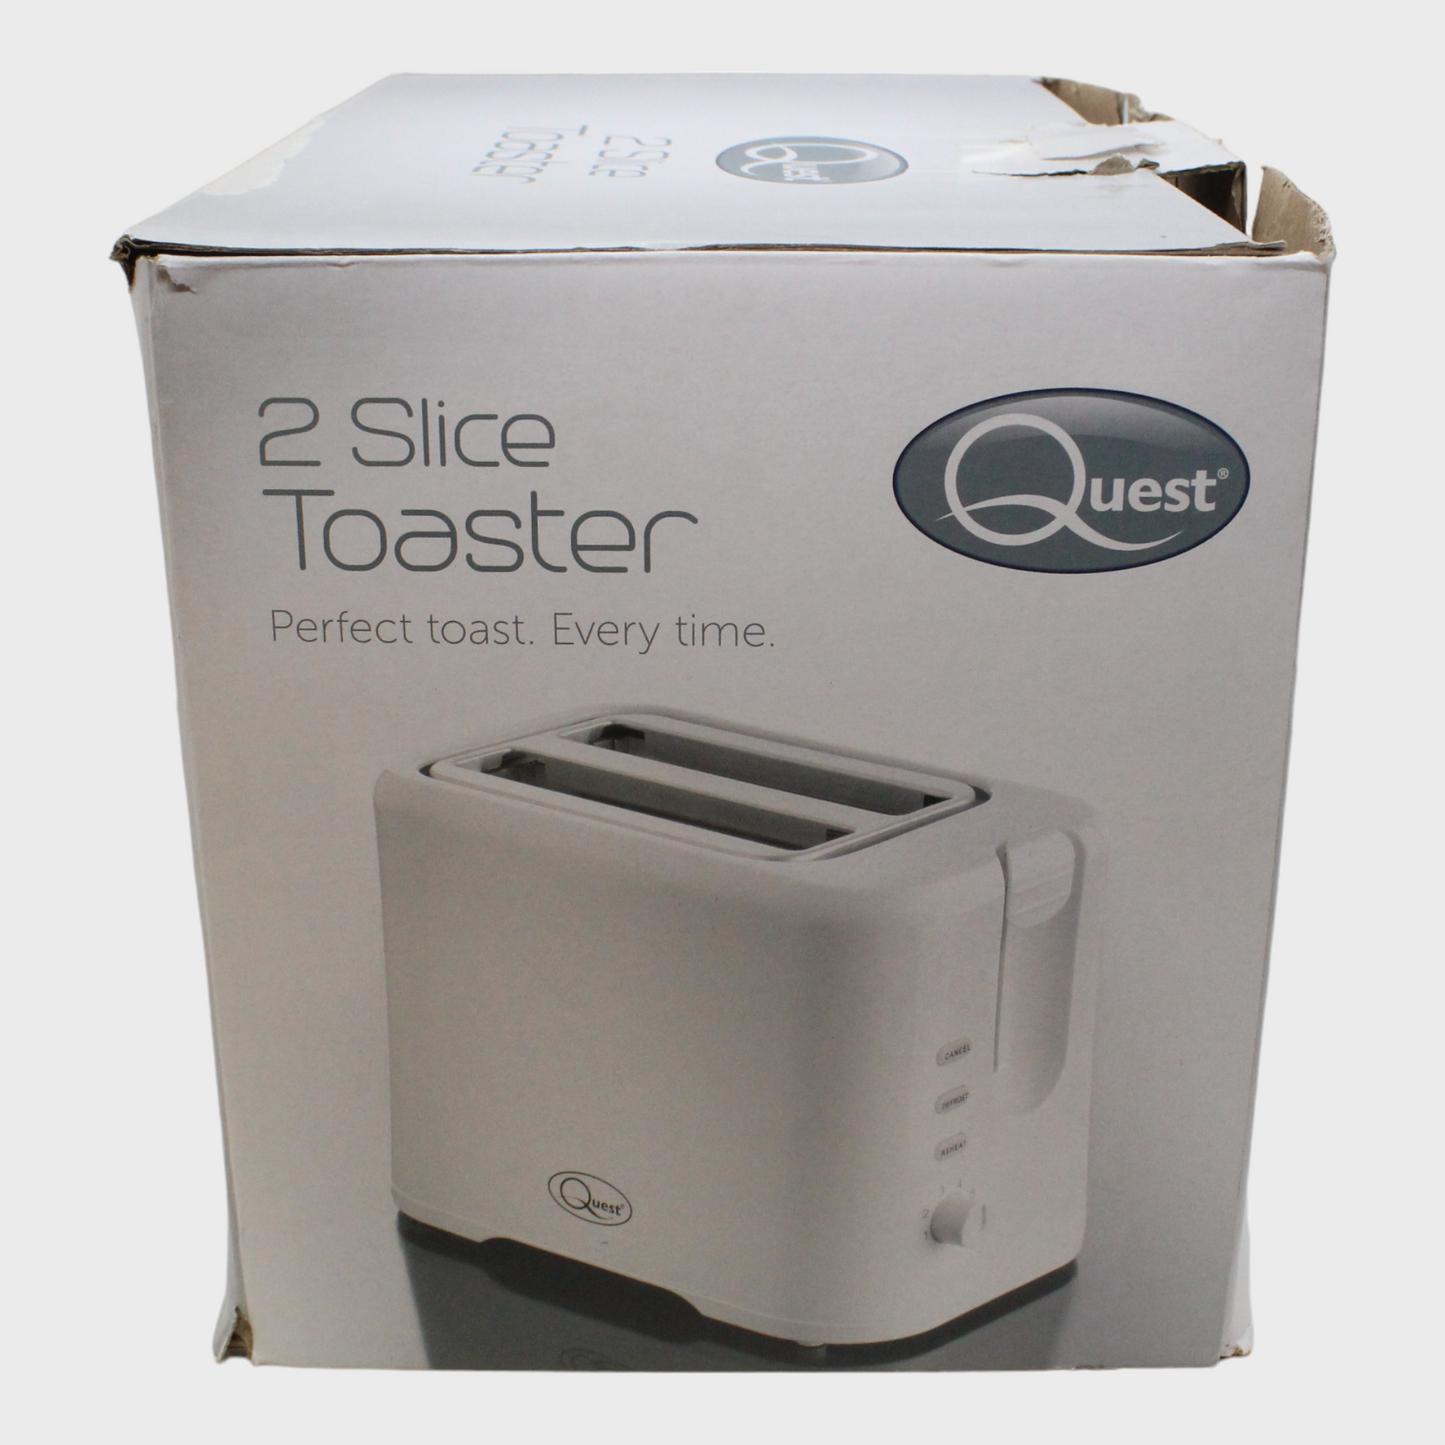 QUEST 34279 2 Slice Toaster White